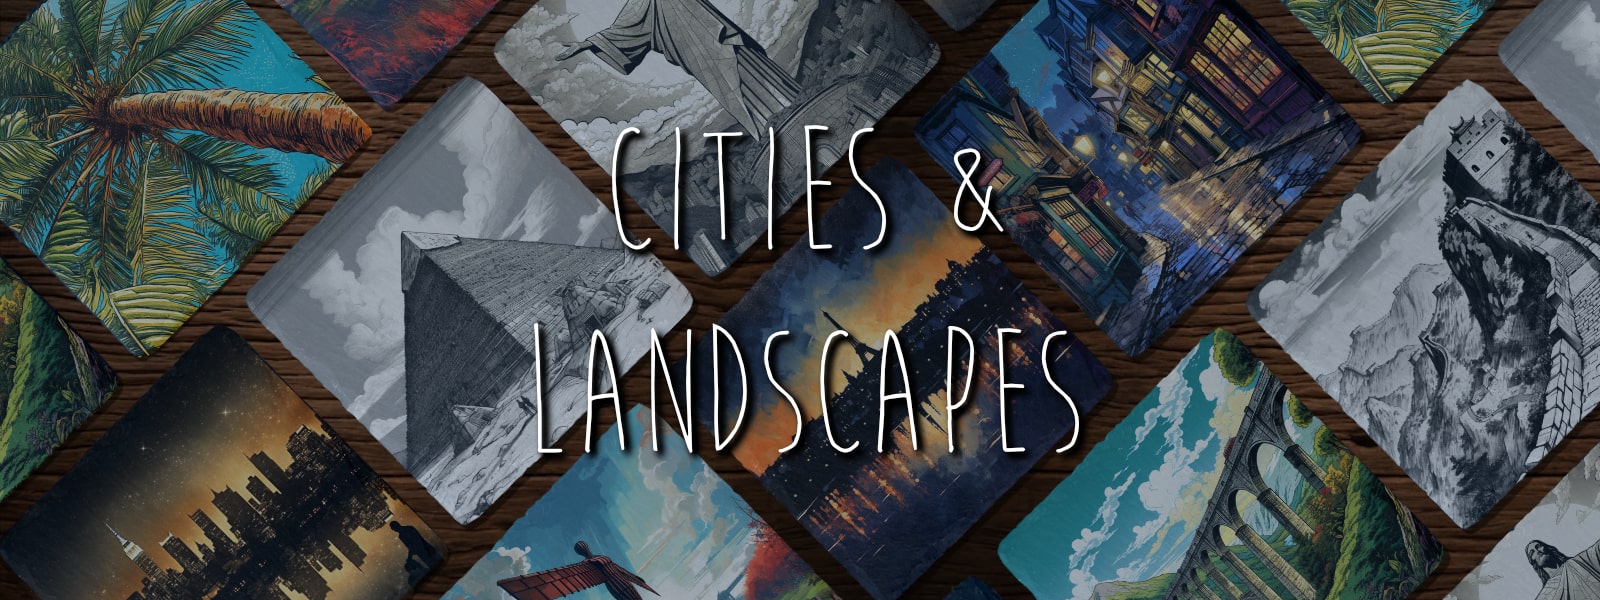 Cities & Landscapes Slate Coasters - GameOn.games